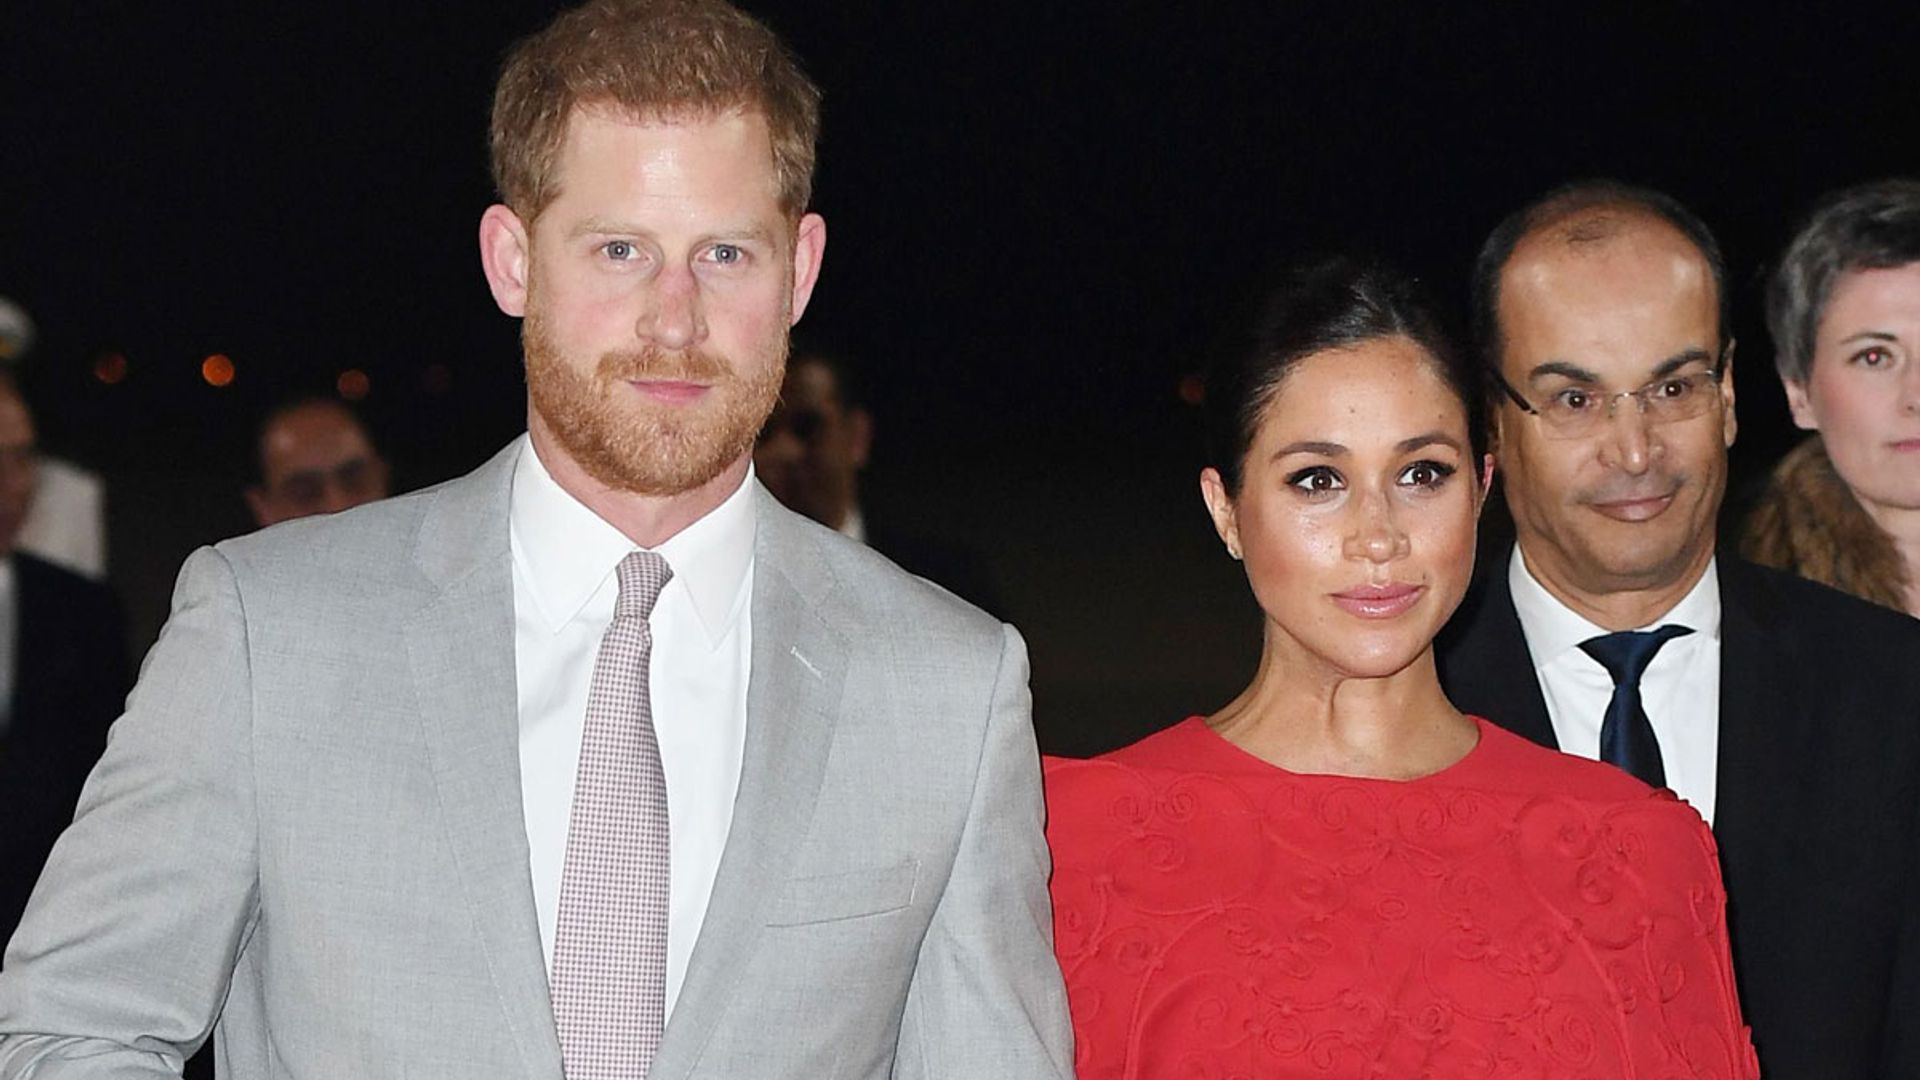 Duke and Duchess of Sussex late for Morocco tour - As it happened